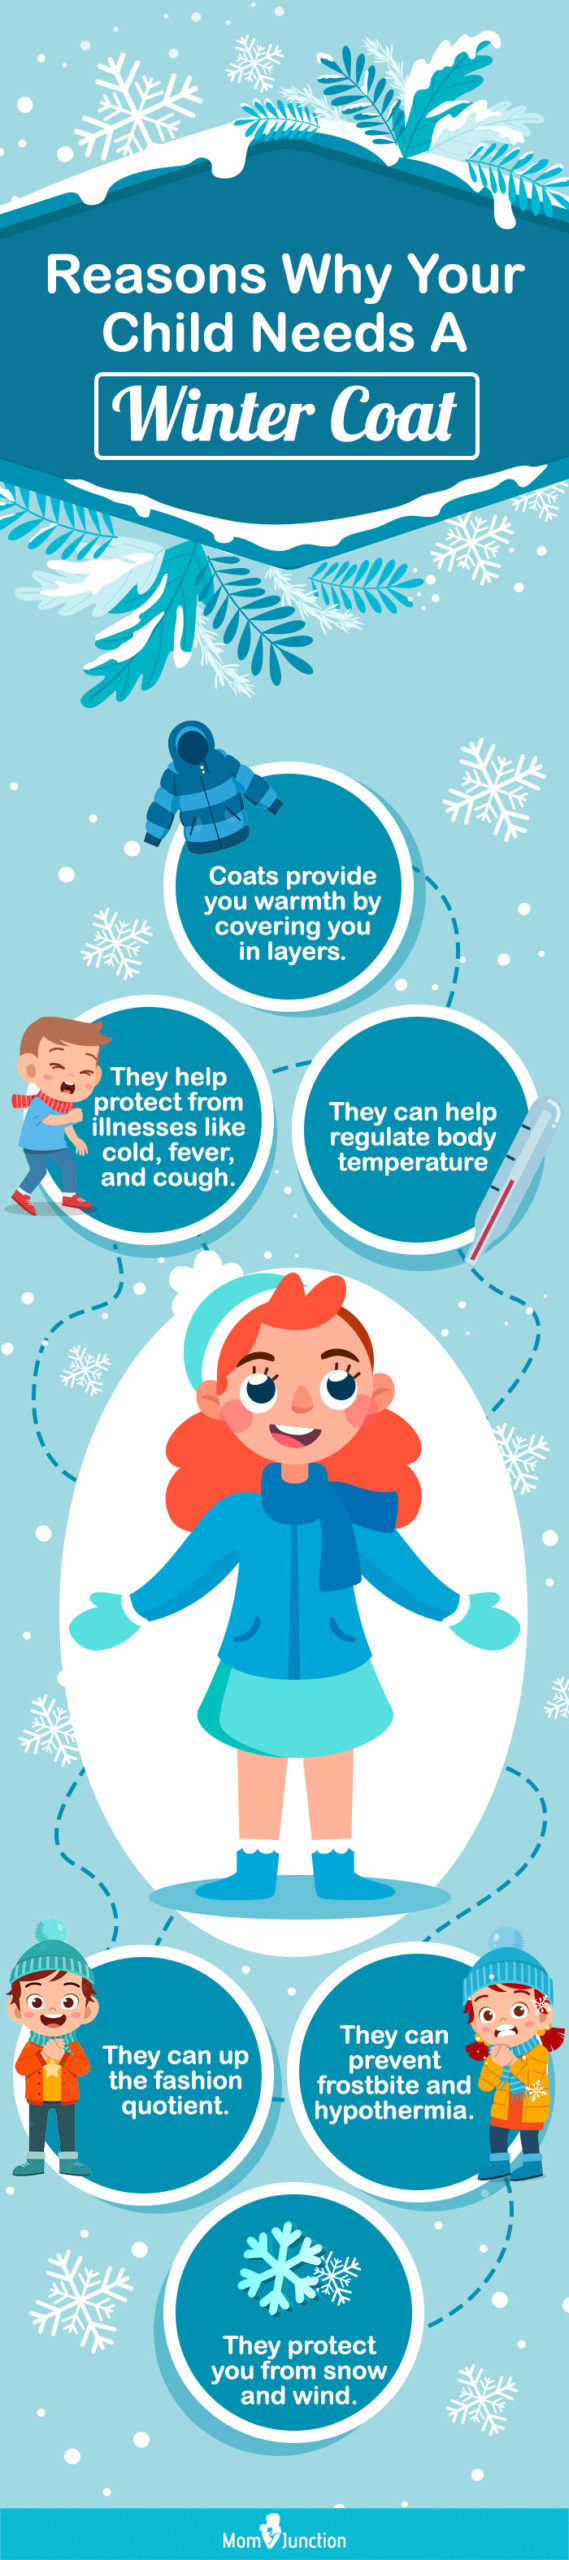 Reasons Why Your Child Needs A Winter Coat(infographic)